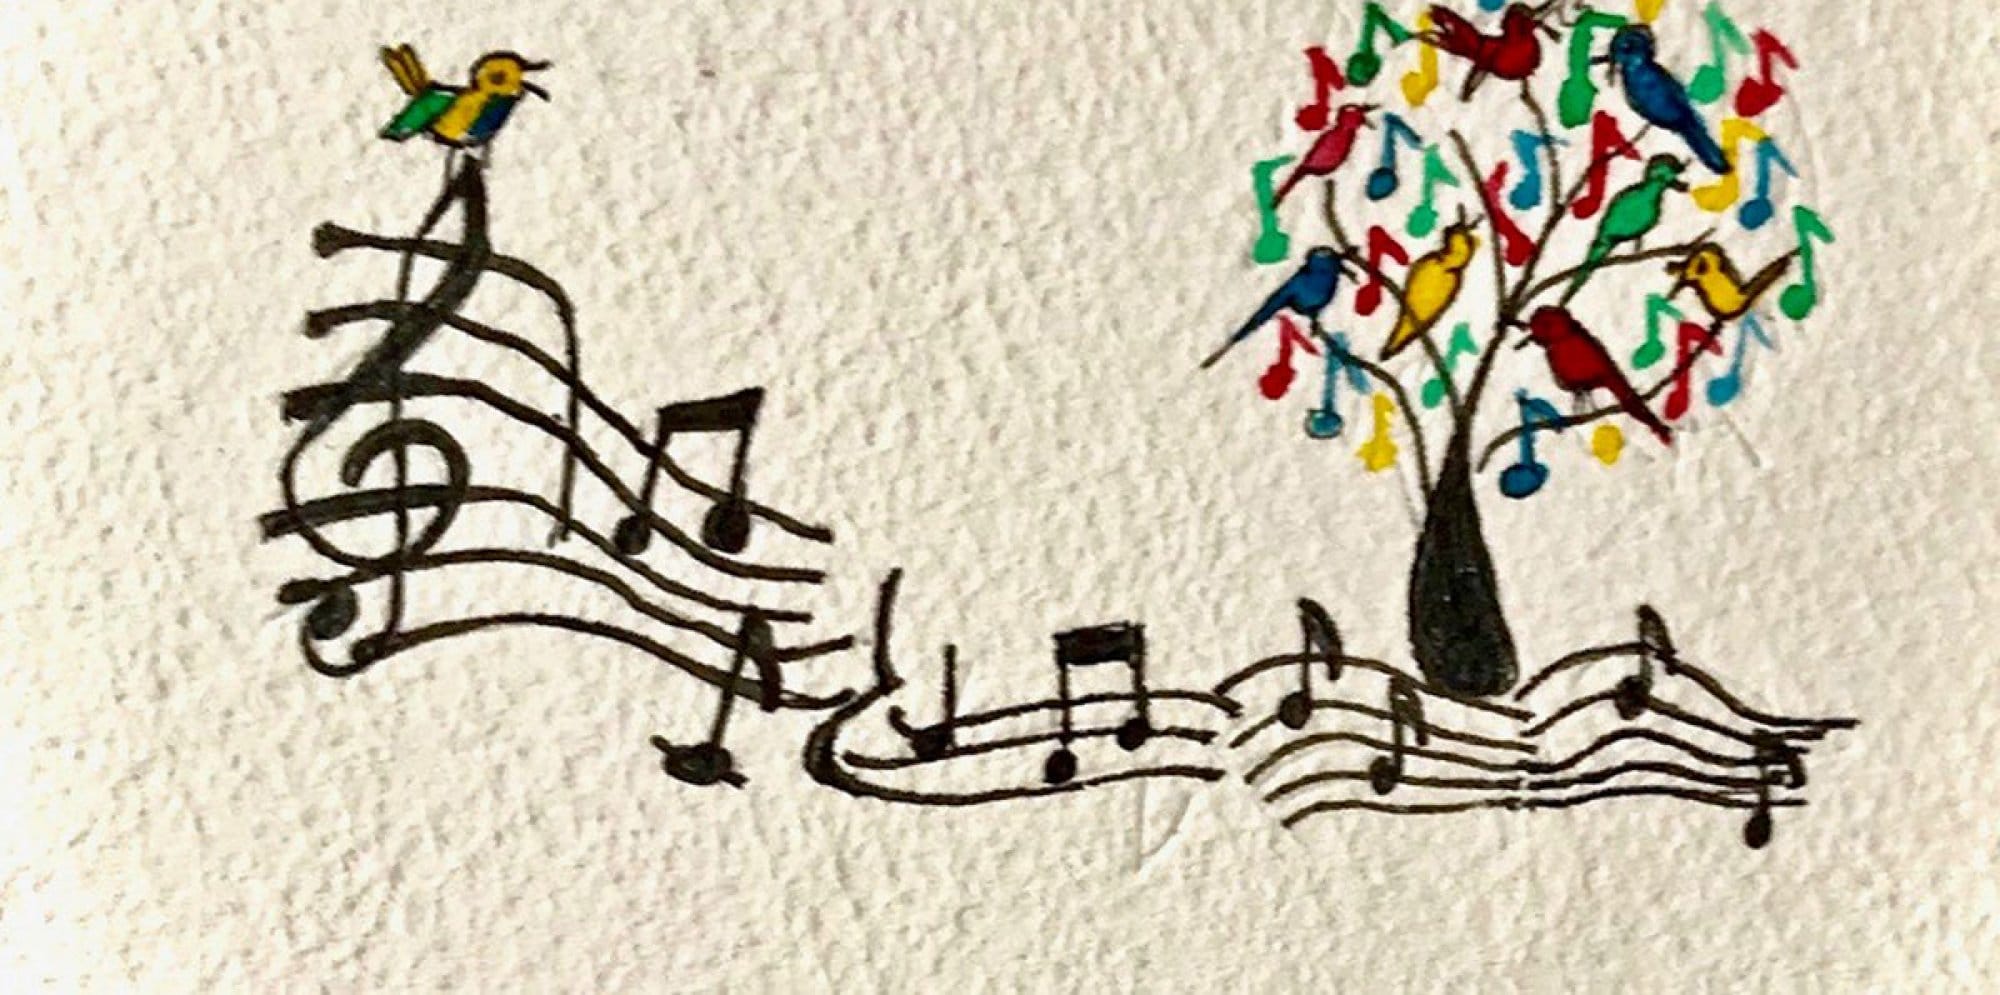 Hand drawn illustration in ink on textured parchment paper. Music notes dance across the page leading to a colourful tree full of birds. The leaves on the tree are made up of music notes.